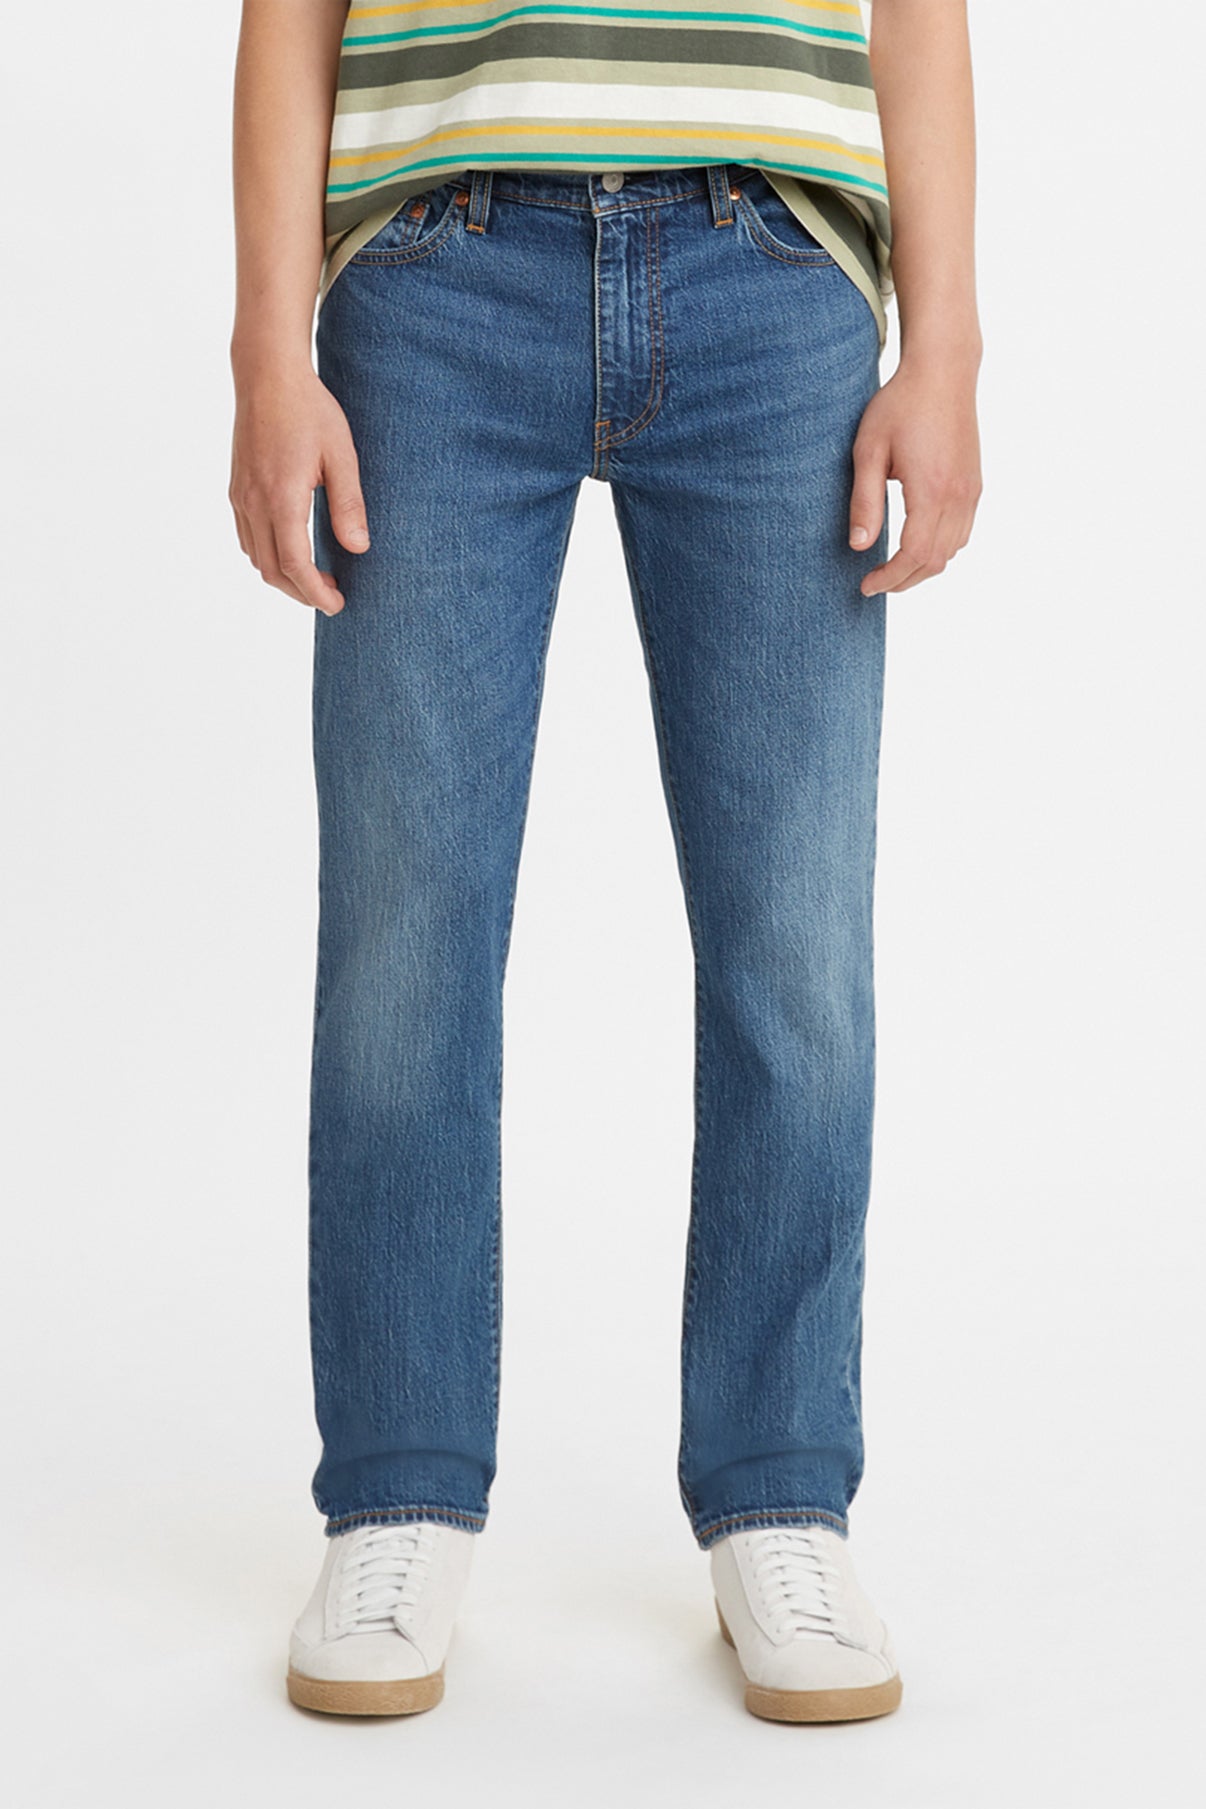 LEVIS MEN Jeans 511 Slim Every Little Thing